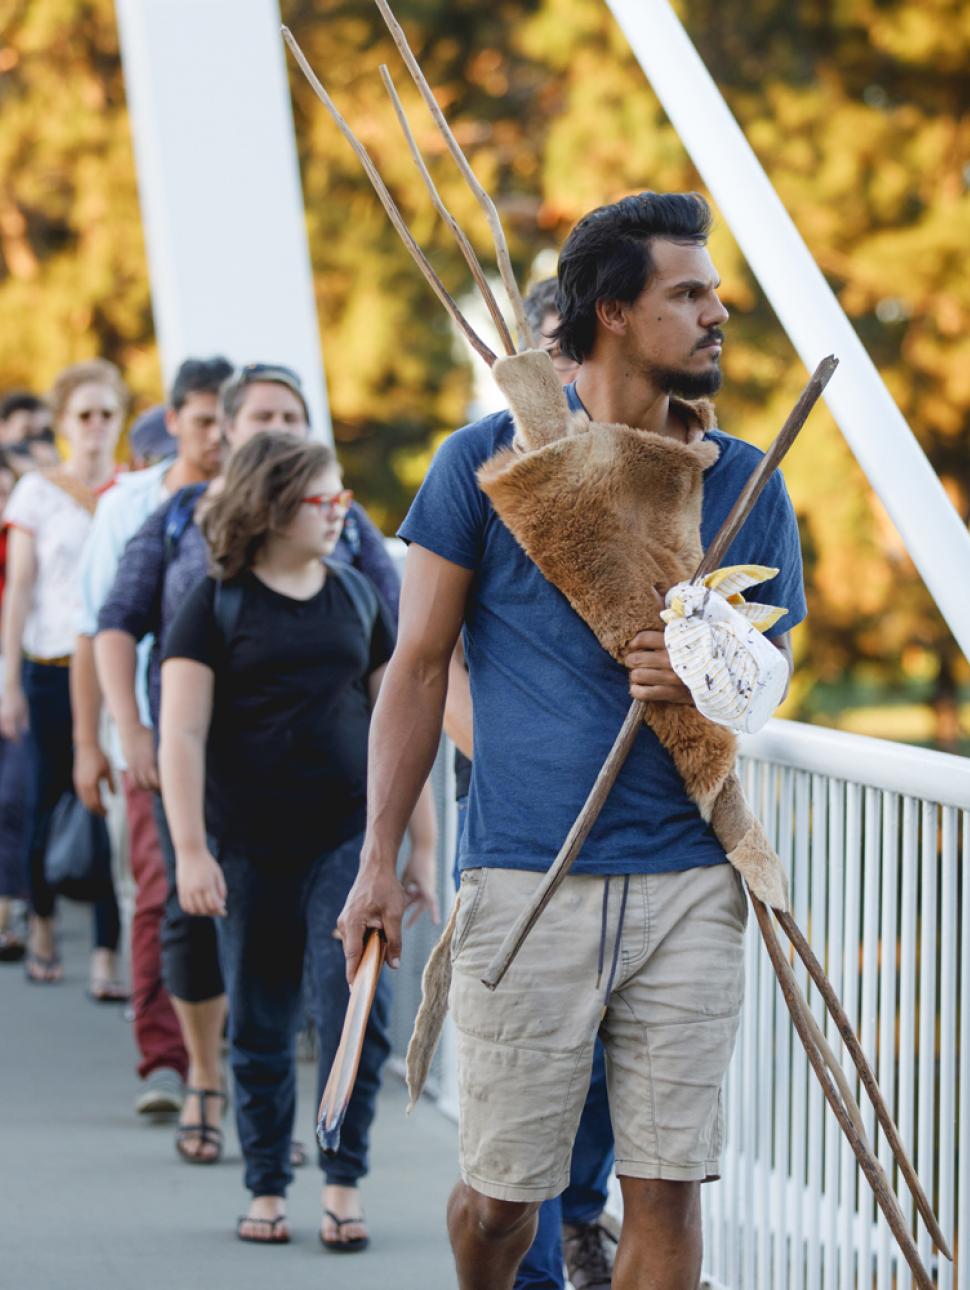 Pictured is a Noongar performer Ian Wilkes holding cultural objects, gazing to the side, leading a group of people single file across a bridge.